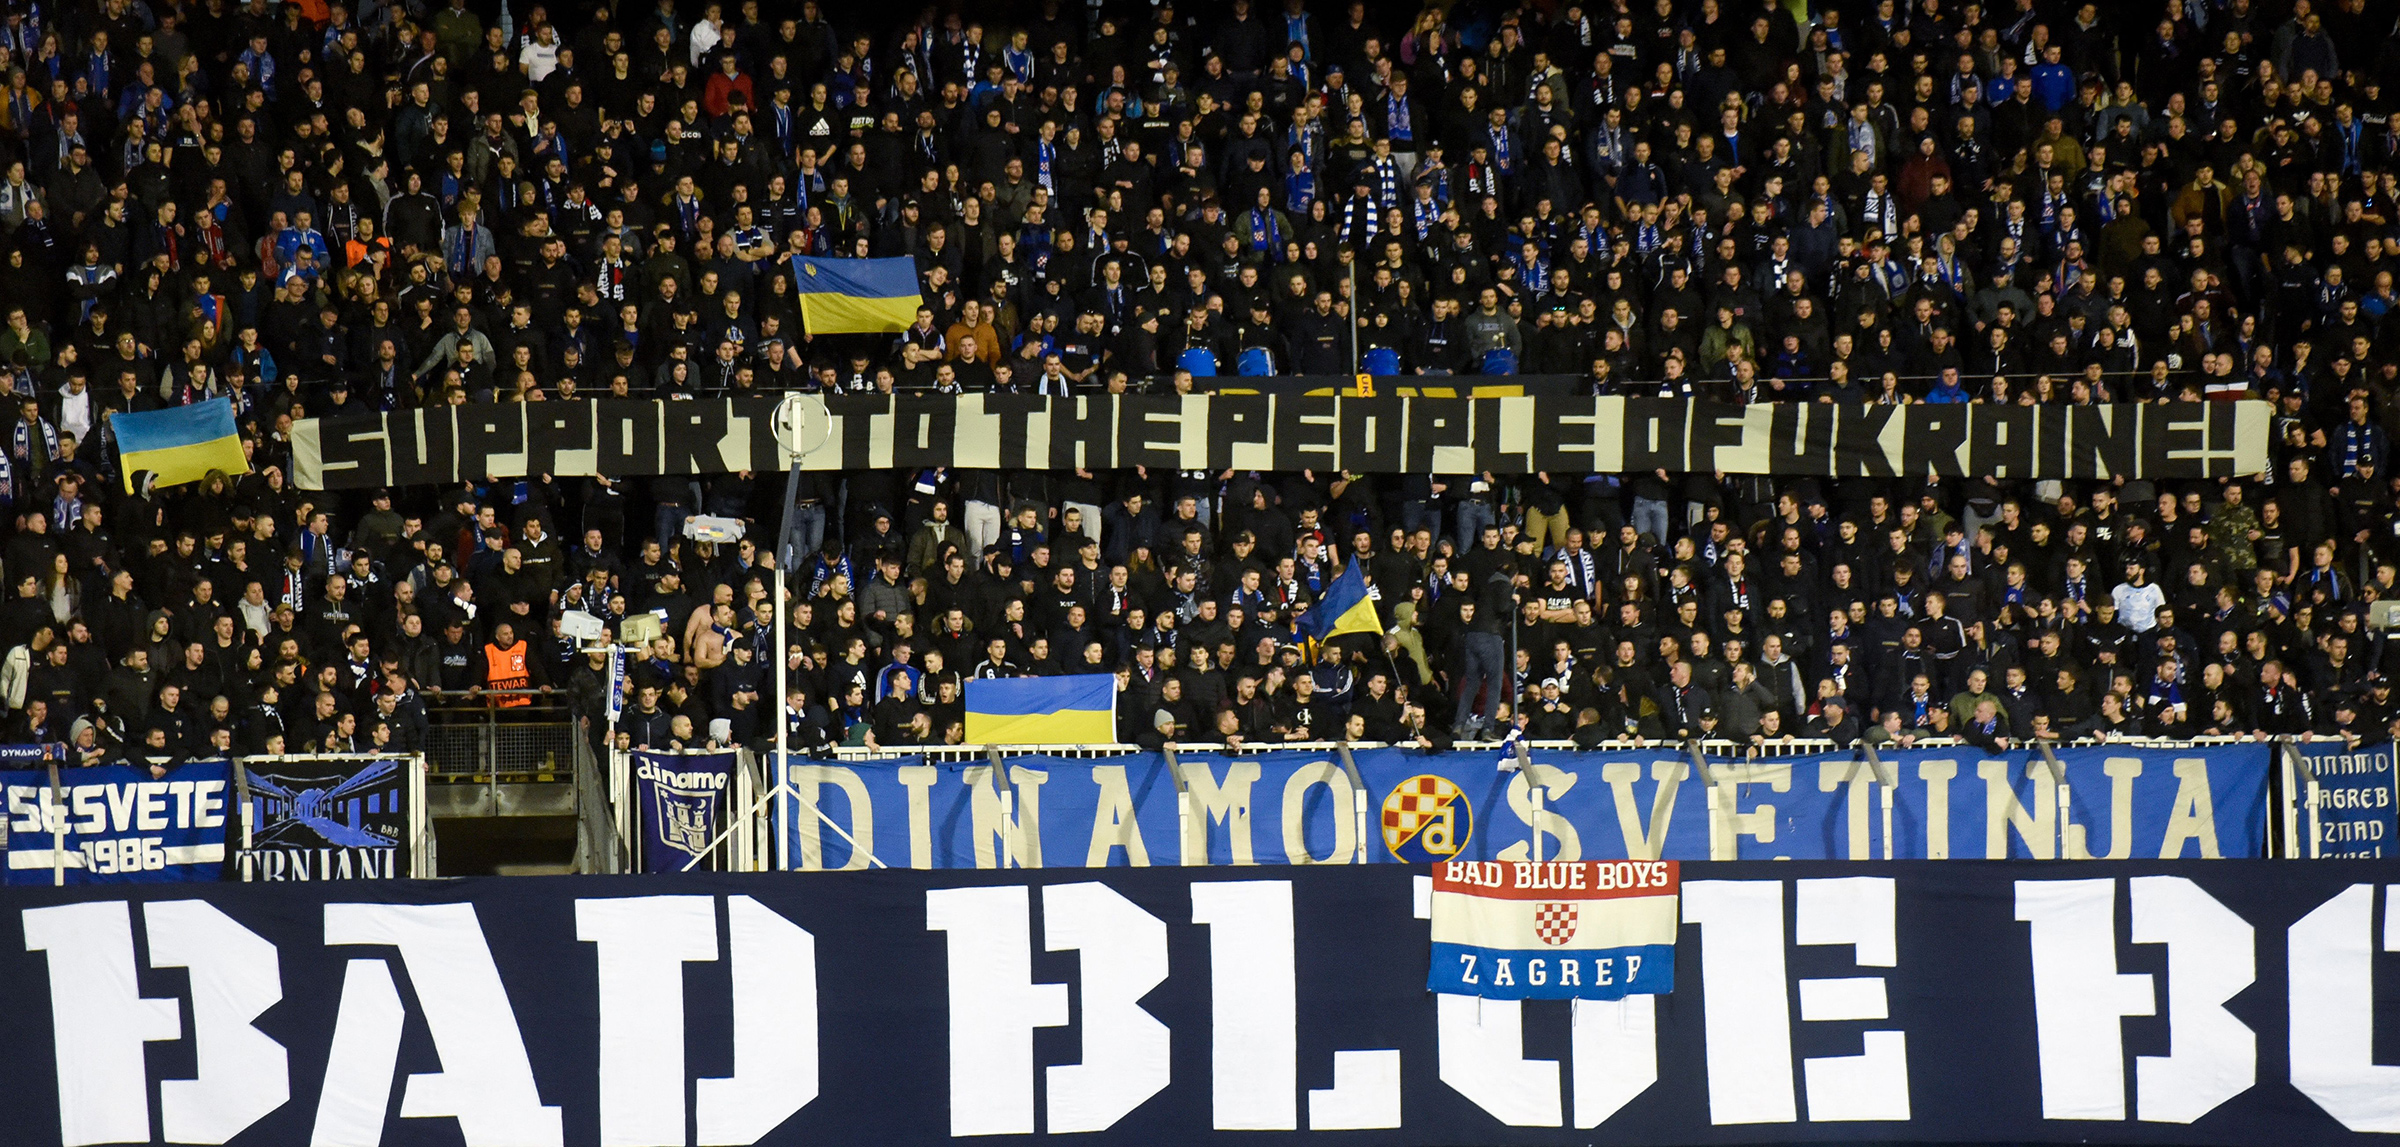 Dinamo Zagreb supporters hold a banner in support of the people of Ukraine during the UEFA Europa League football second leg match between Dinamo Zagreb and Sevilla FC at the Maksimir stadium in Zagreb, Croatia, on Feb. 24 (Denis Lovrovic—AFP/Getty Images)